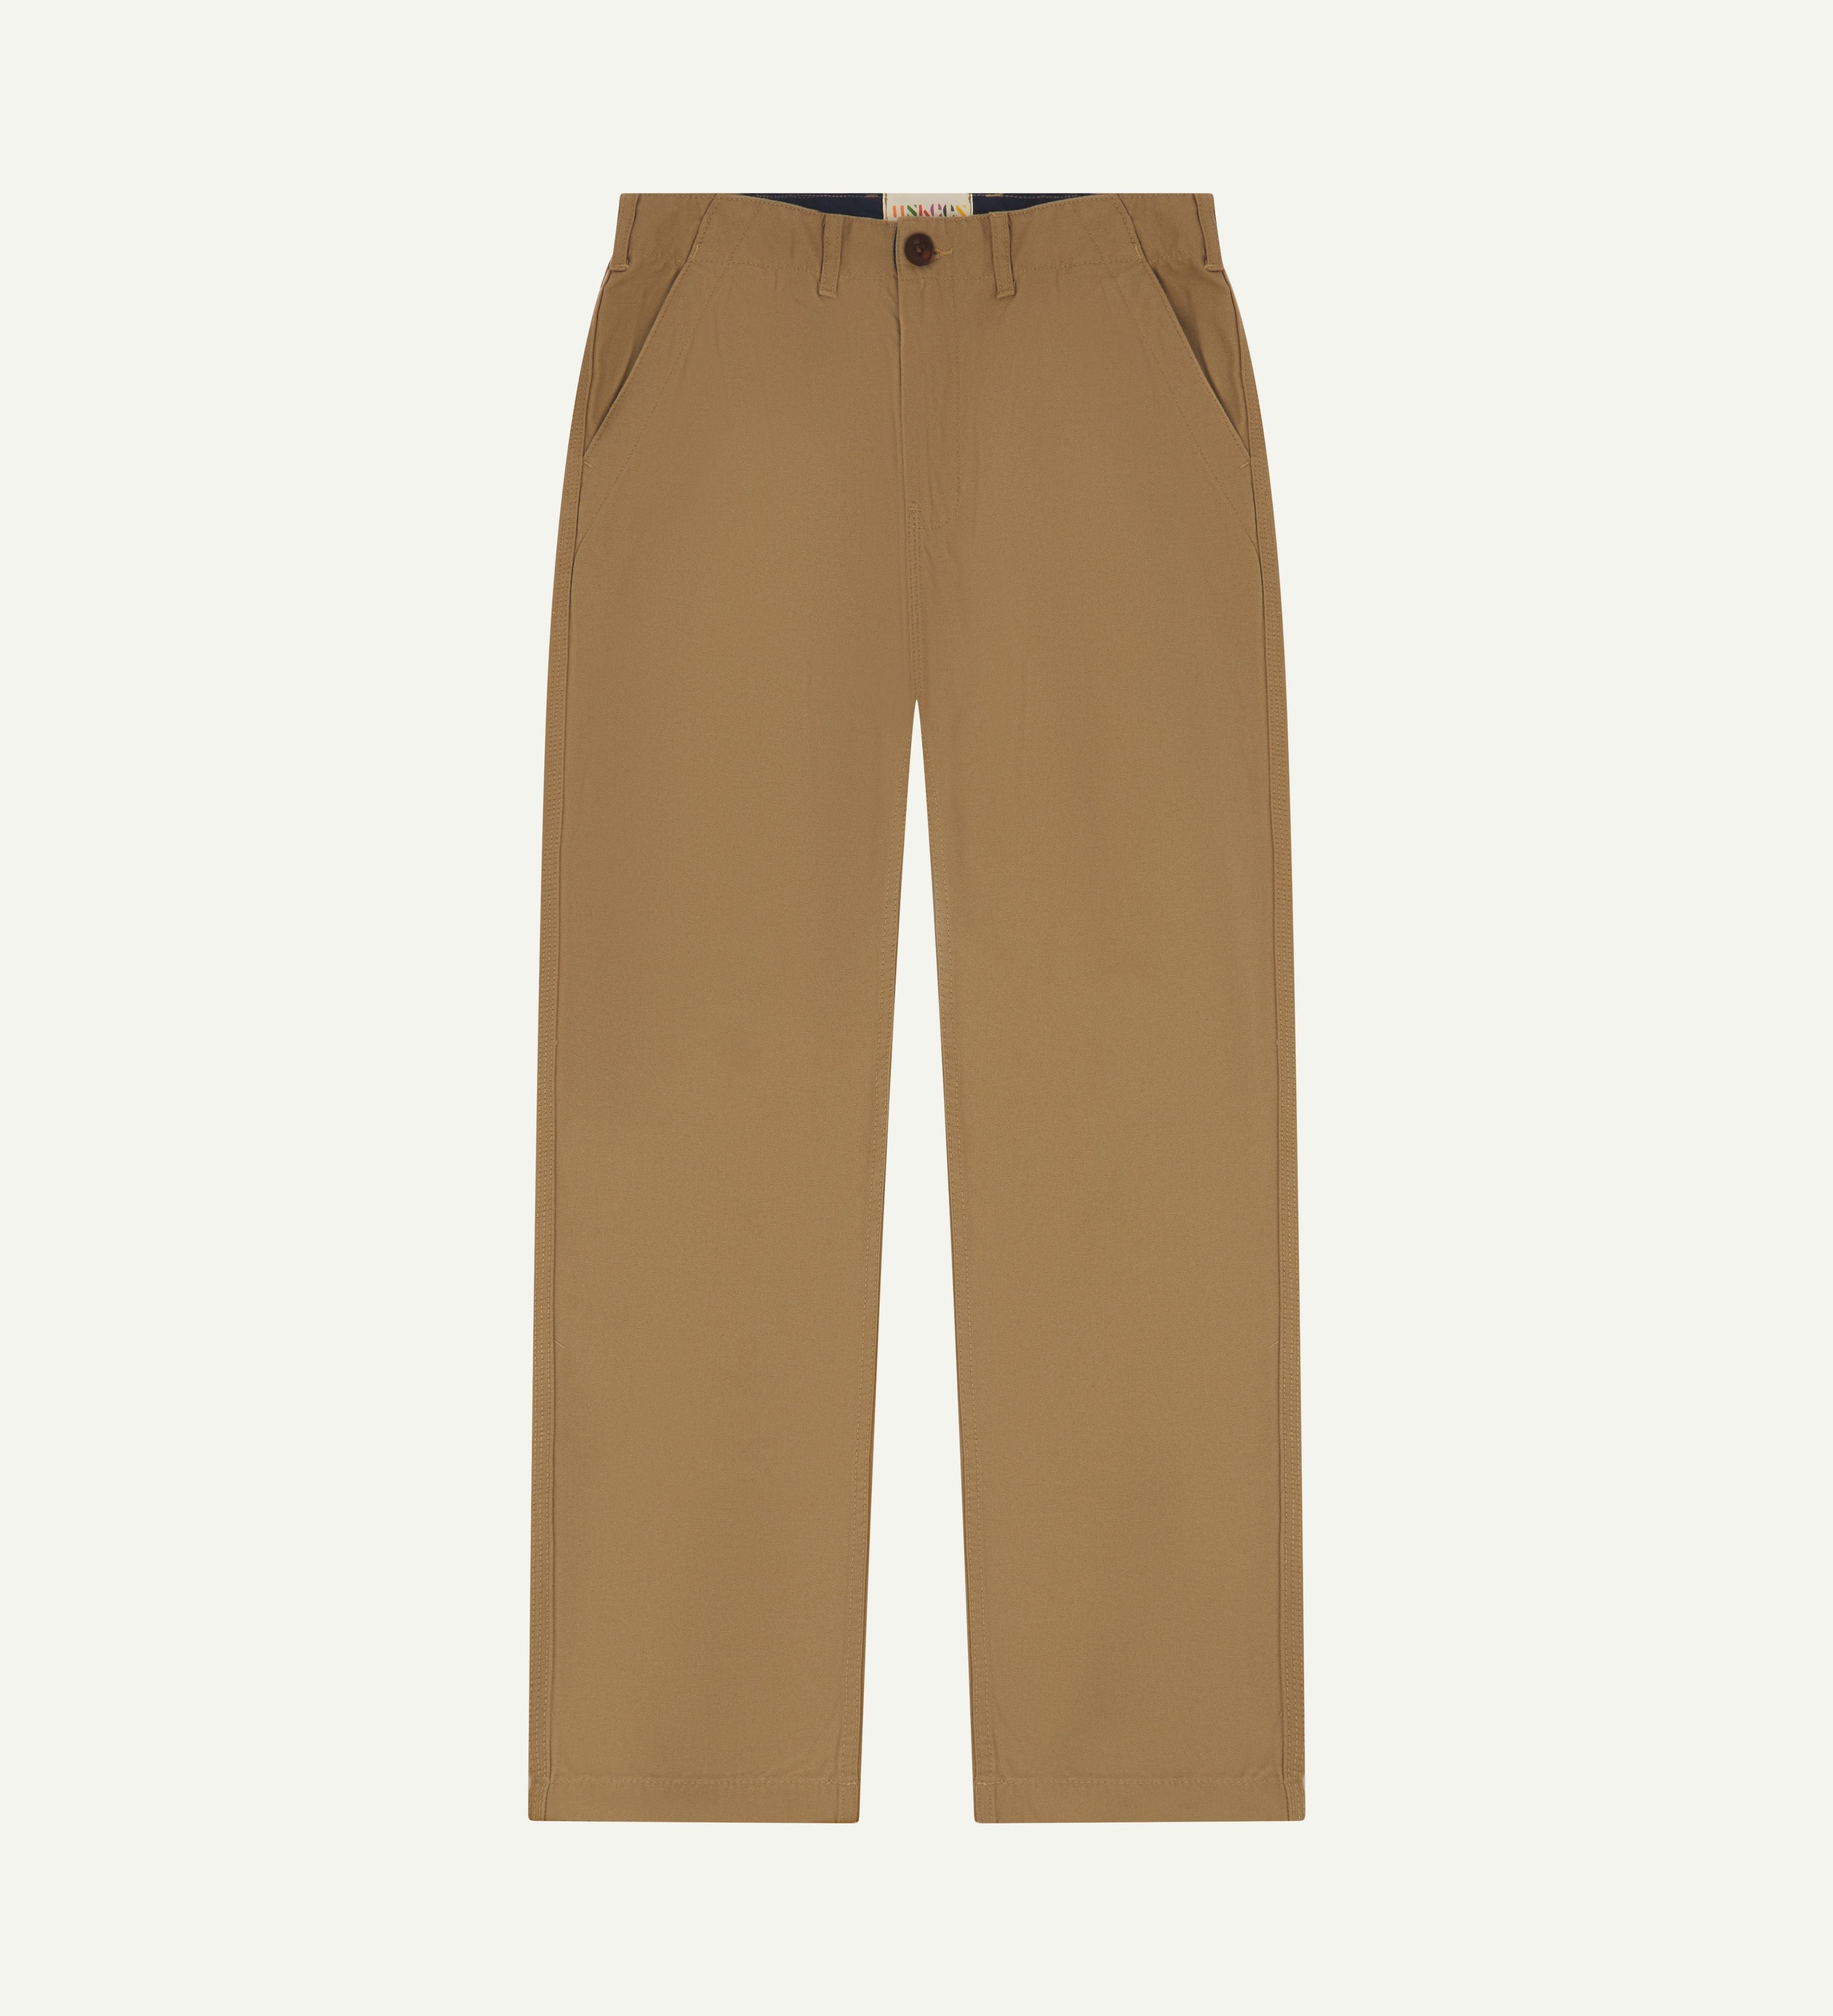 Front flat shot of #5005 Uskees men's organic cotton khaki casual trousers. on white background